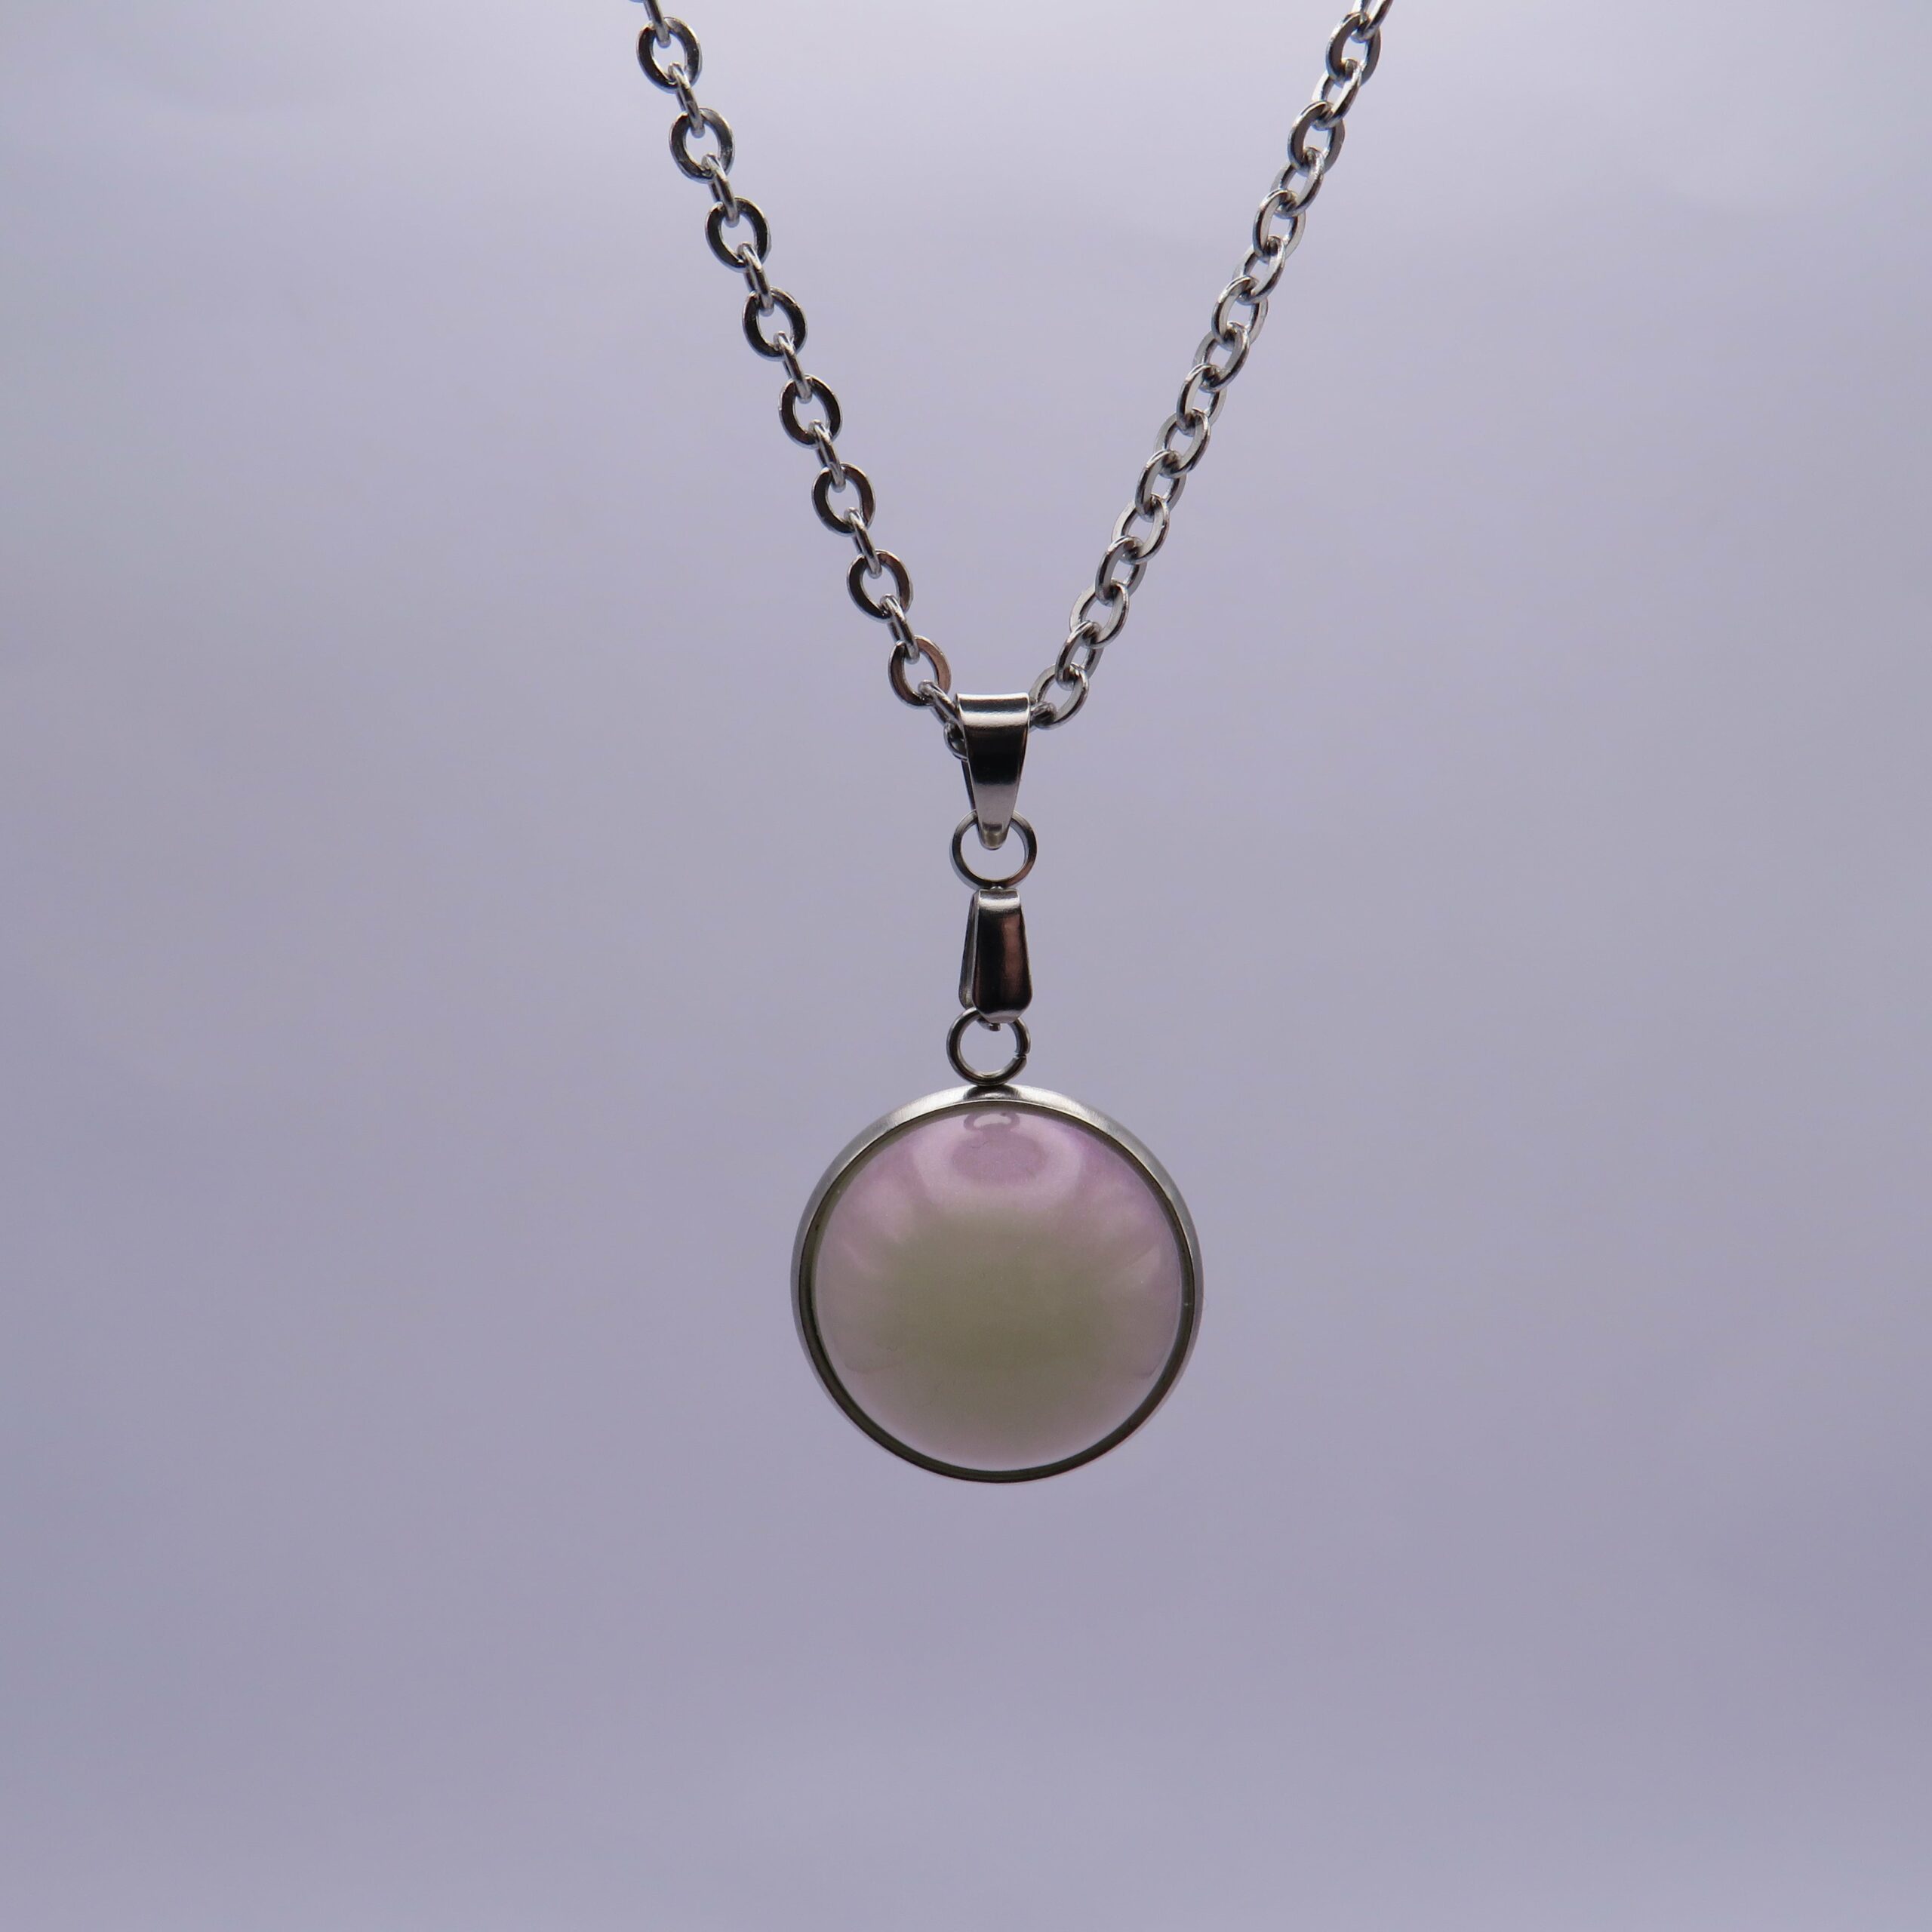 Stainless Steel White Resin Cabochon Medium Pendant Necklace